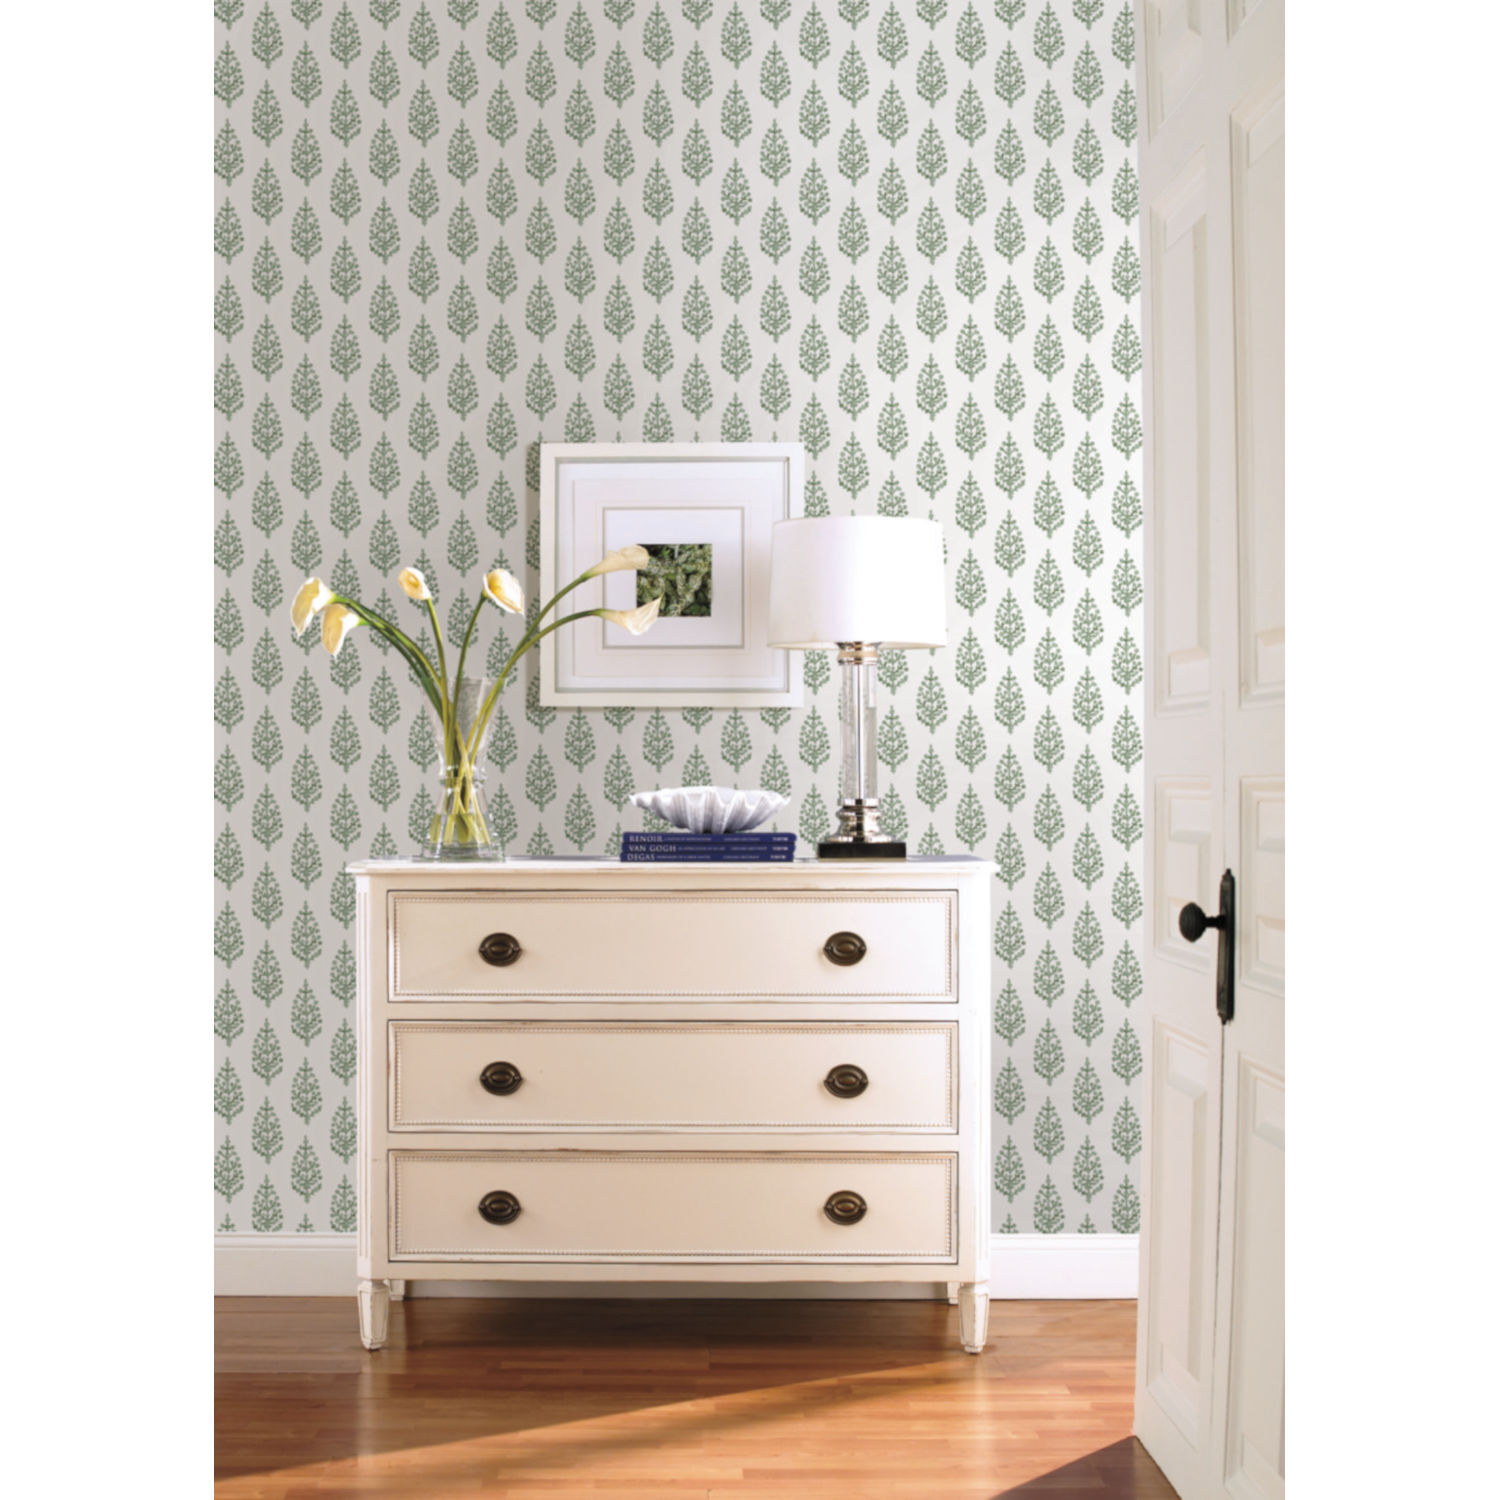 Magnolia Home by Joanna Gaines Wildflower Spray and Stick Wallpaper ME1515   The Home Depot